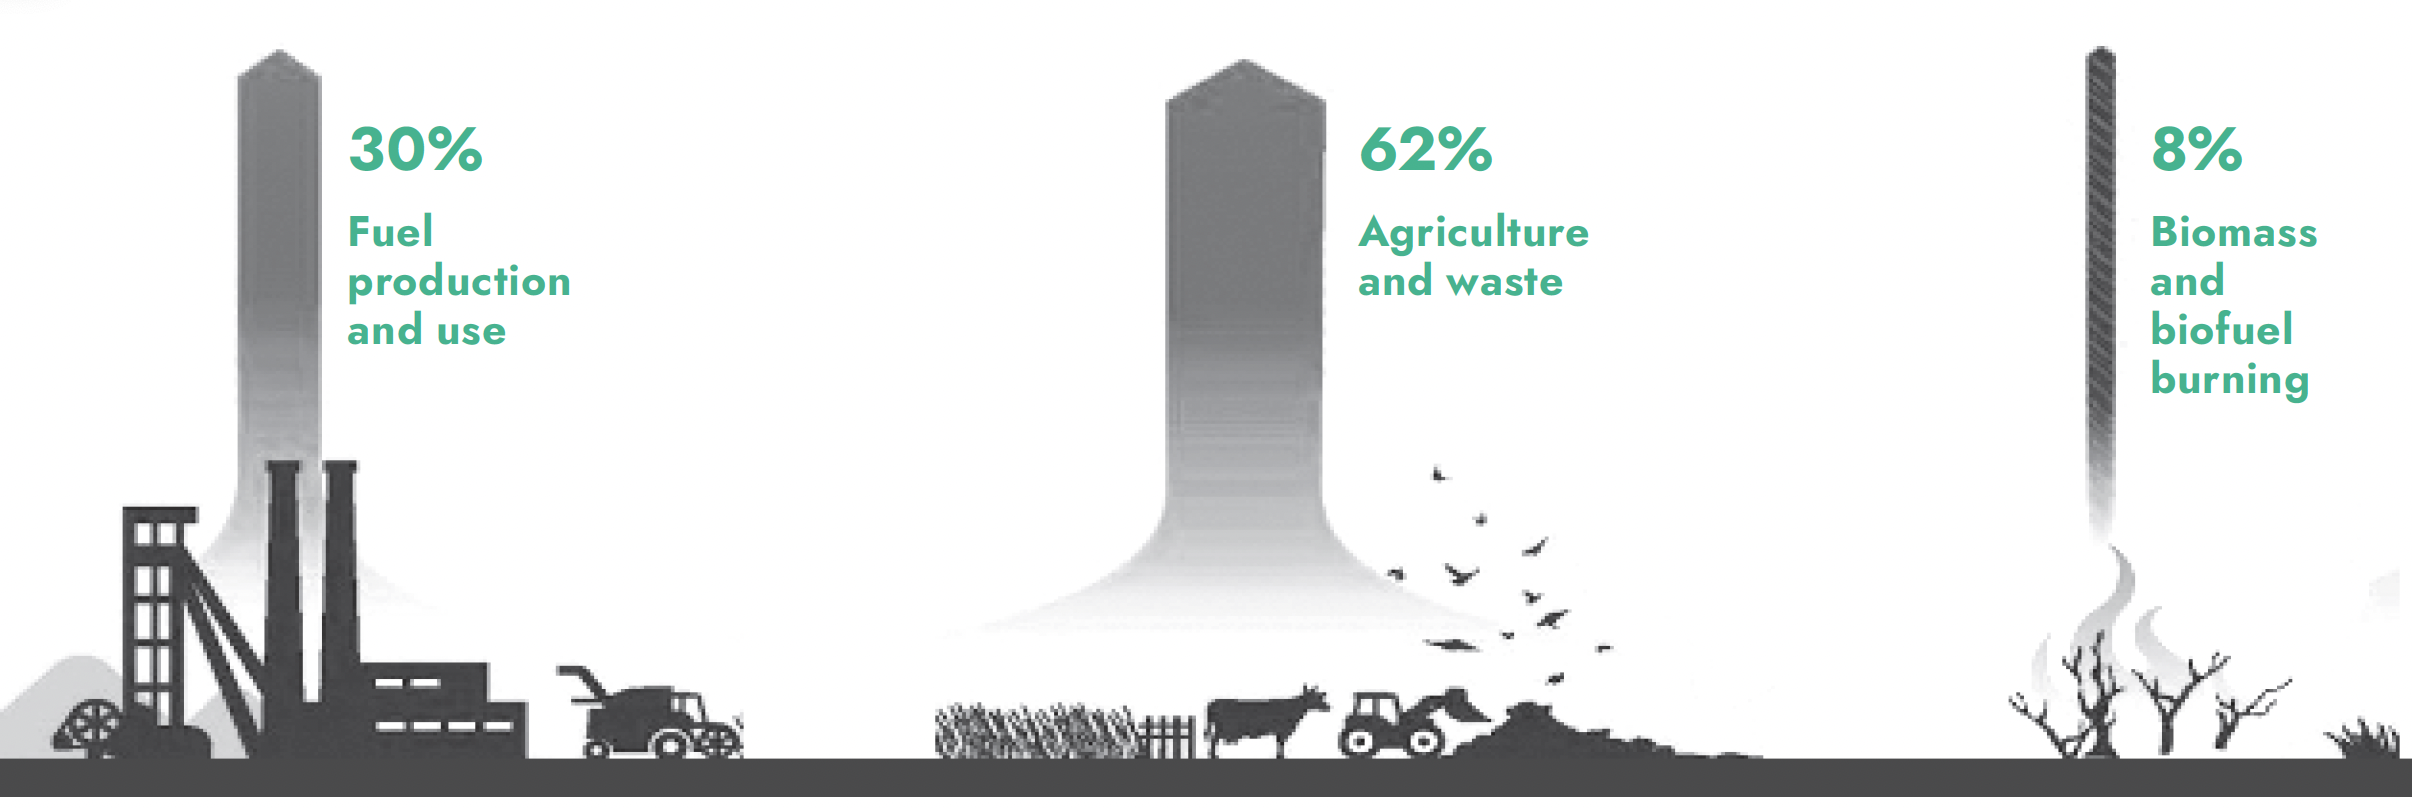 Chart: 30% Fuel production and use, 62% Agriculture and waste, 8% Biomass and biofuel burning